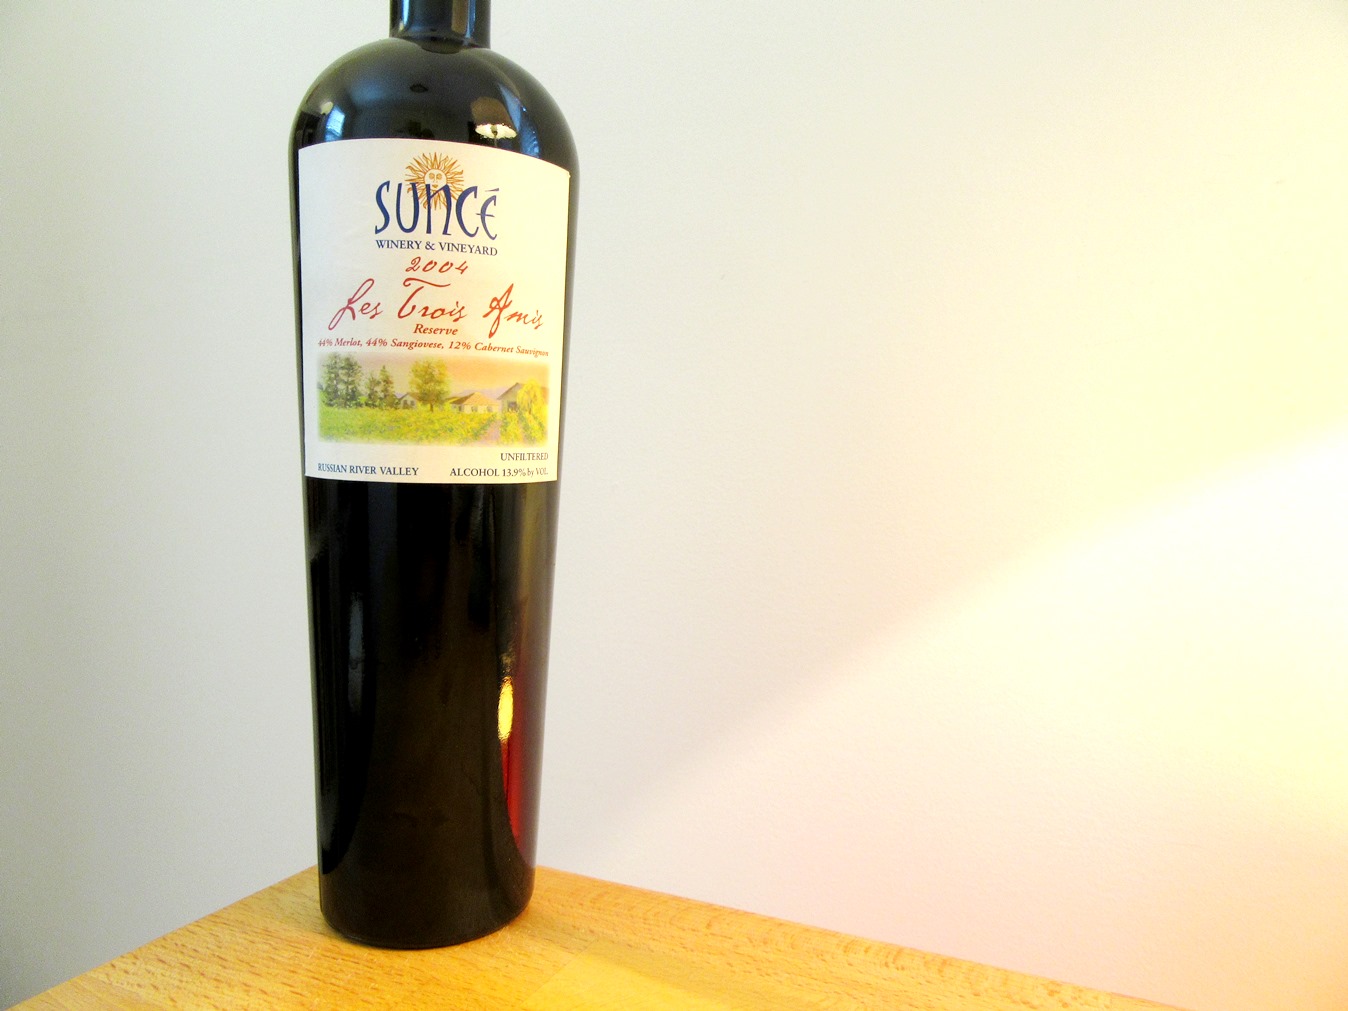 Suncé Winery & Vineyard, Reserve Les Trois Amis 2004, Russian River Valley, California, Wine Casual